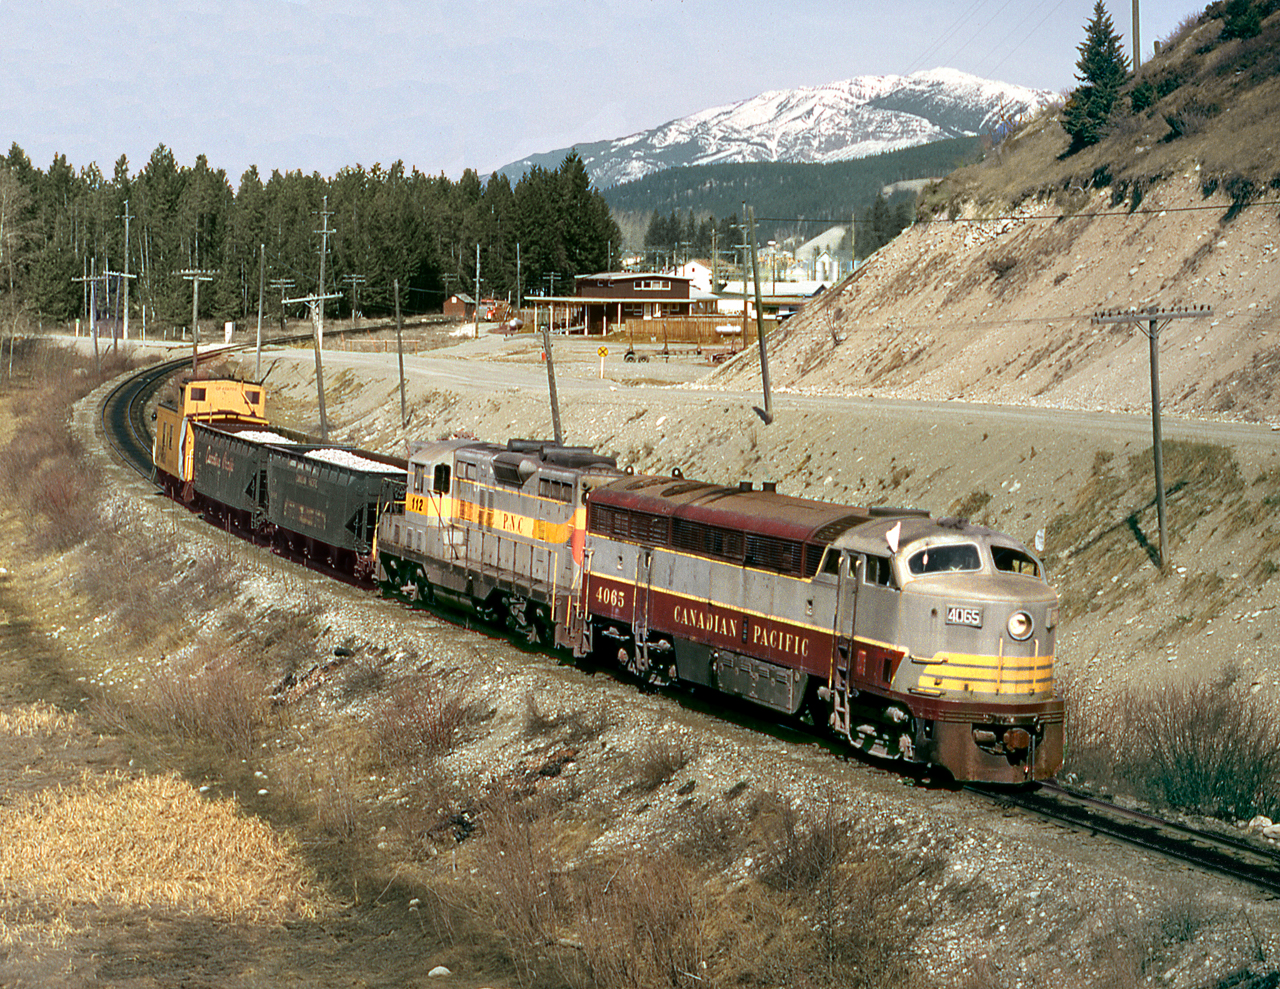 The Golden-Cranbrook KCS freight with a C-Liner and leased PNC GP9 heads from the Main Line yard to the South Yard where it will pick up the balance of its train